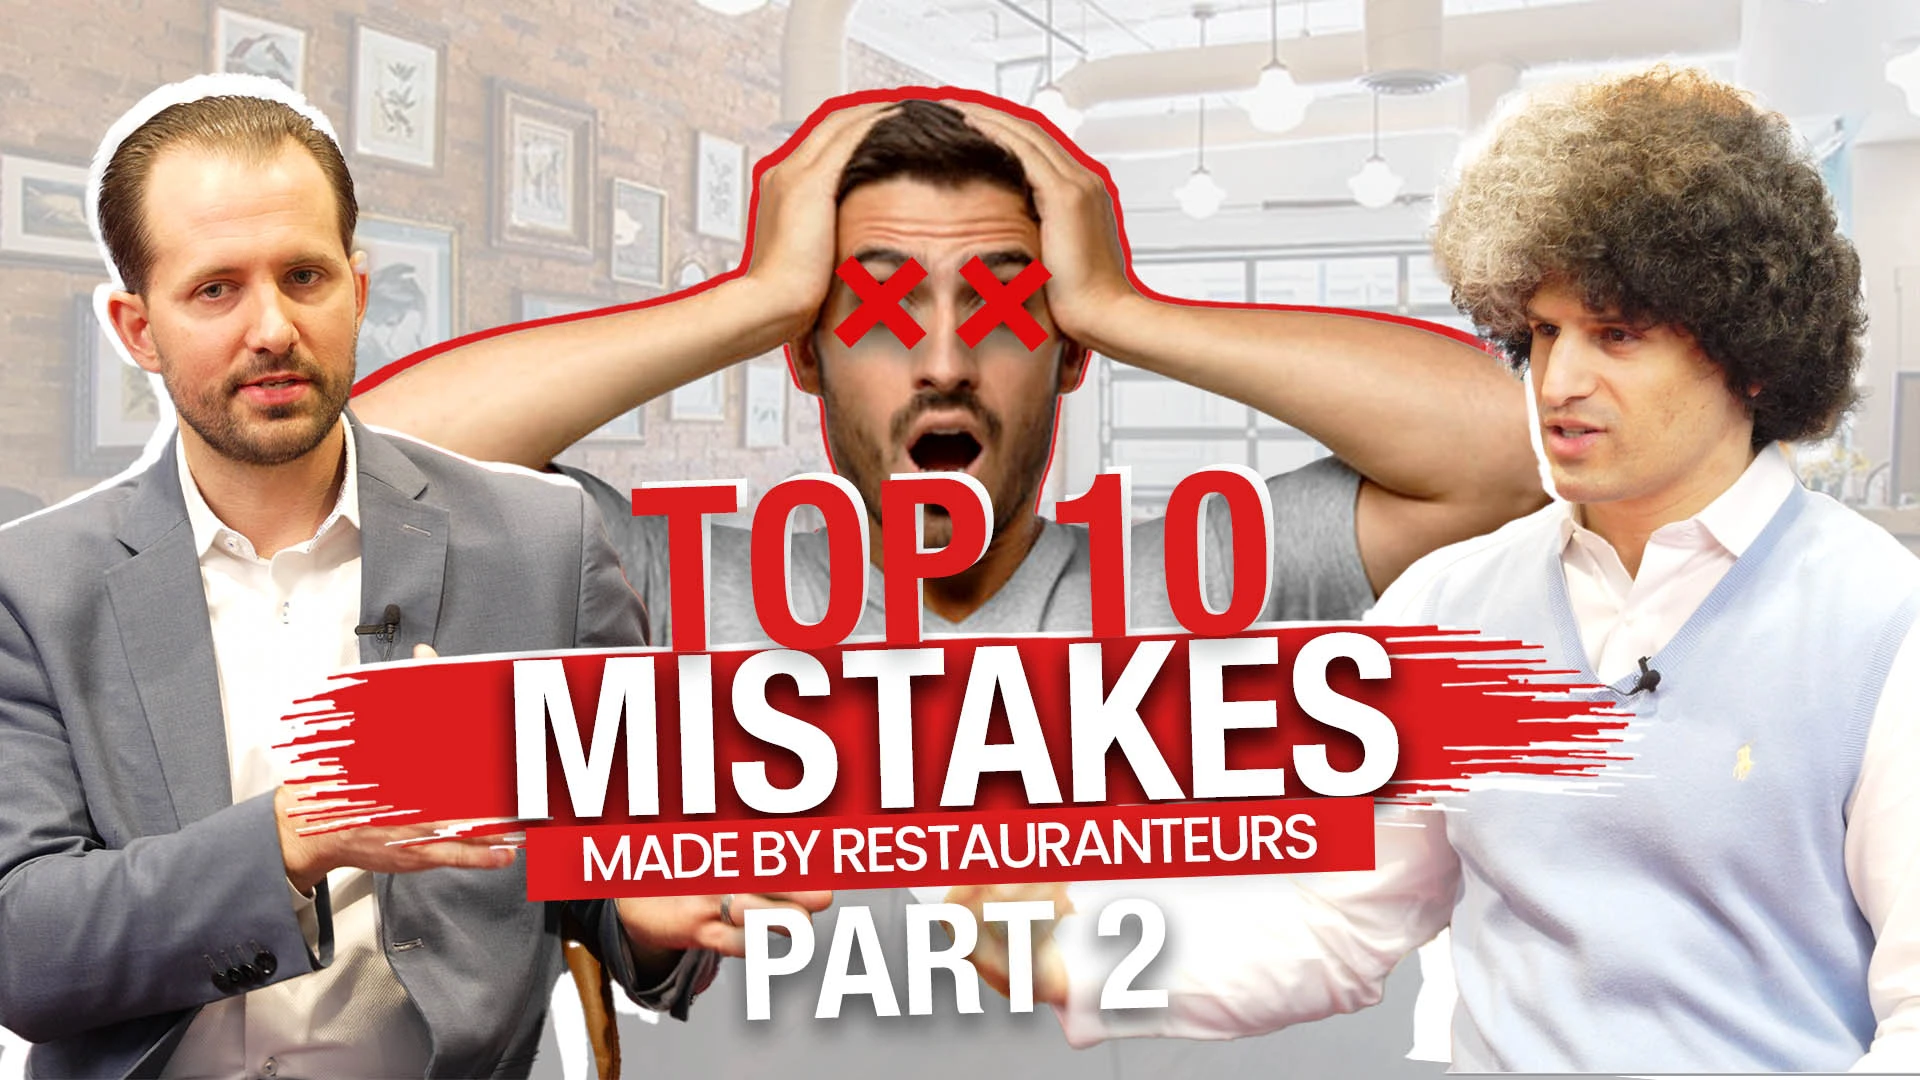 Top 10 mistakes made by restaurants Part 2